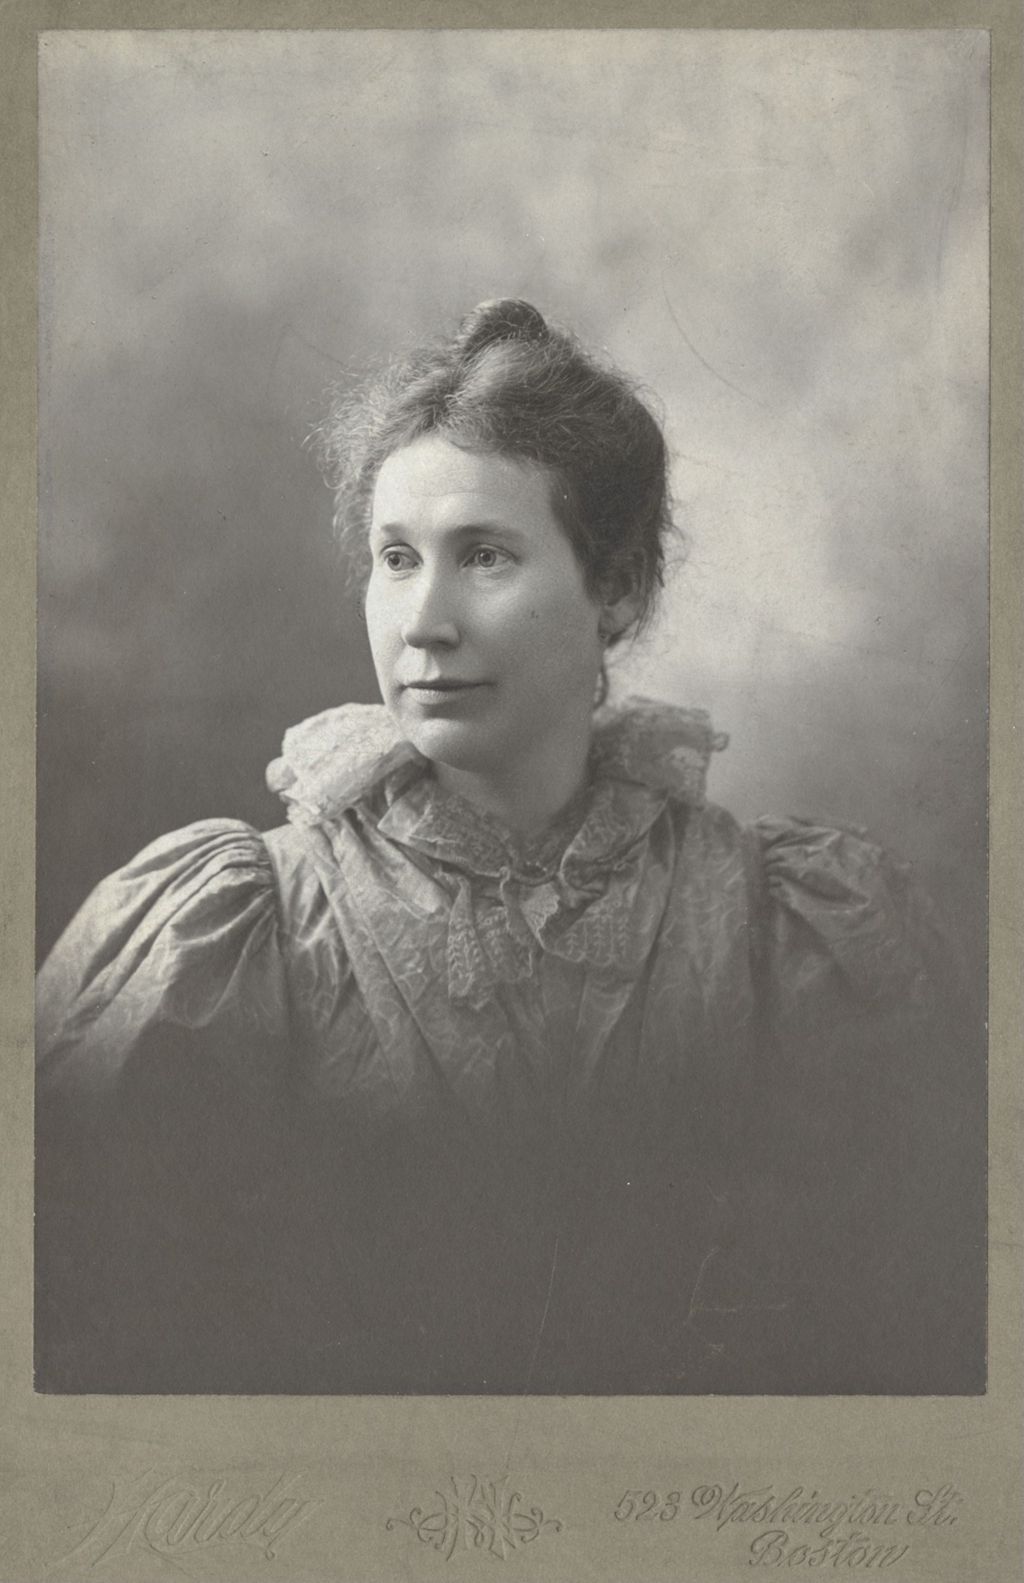 Miniature of Hull-House resident and labor organizer Mary Kenney O'Sullivan